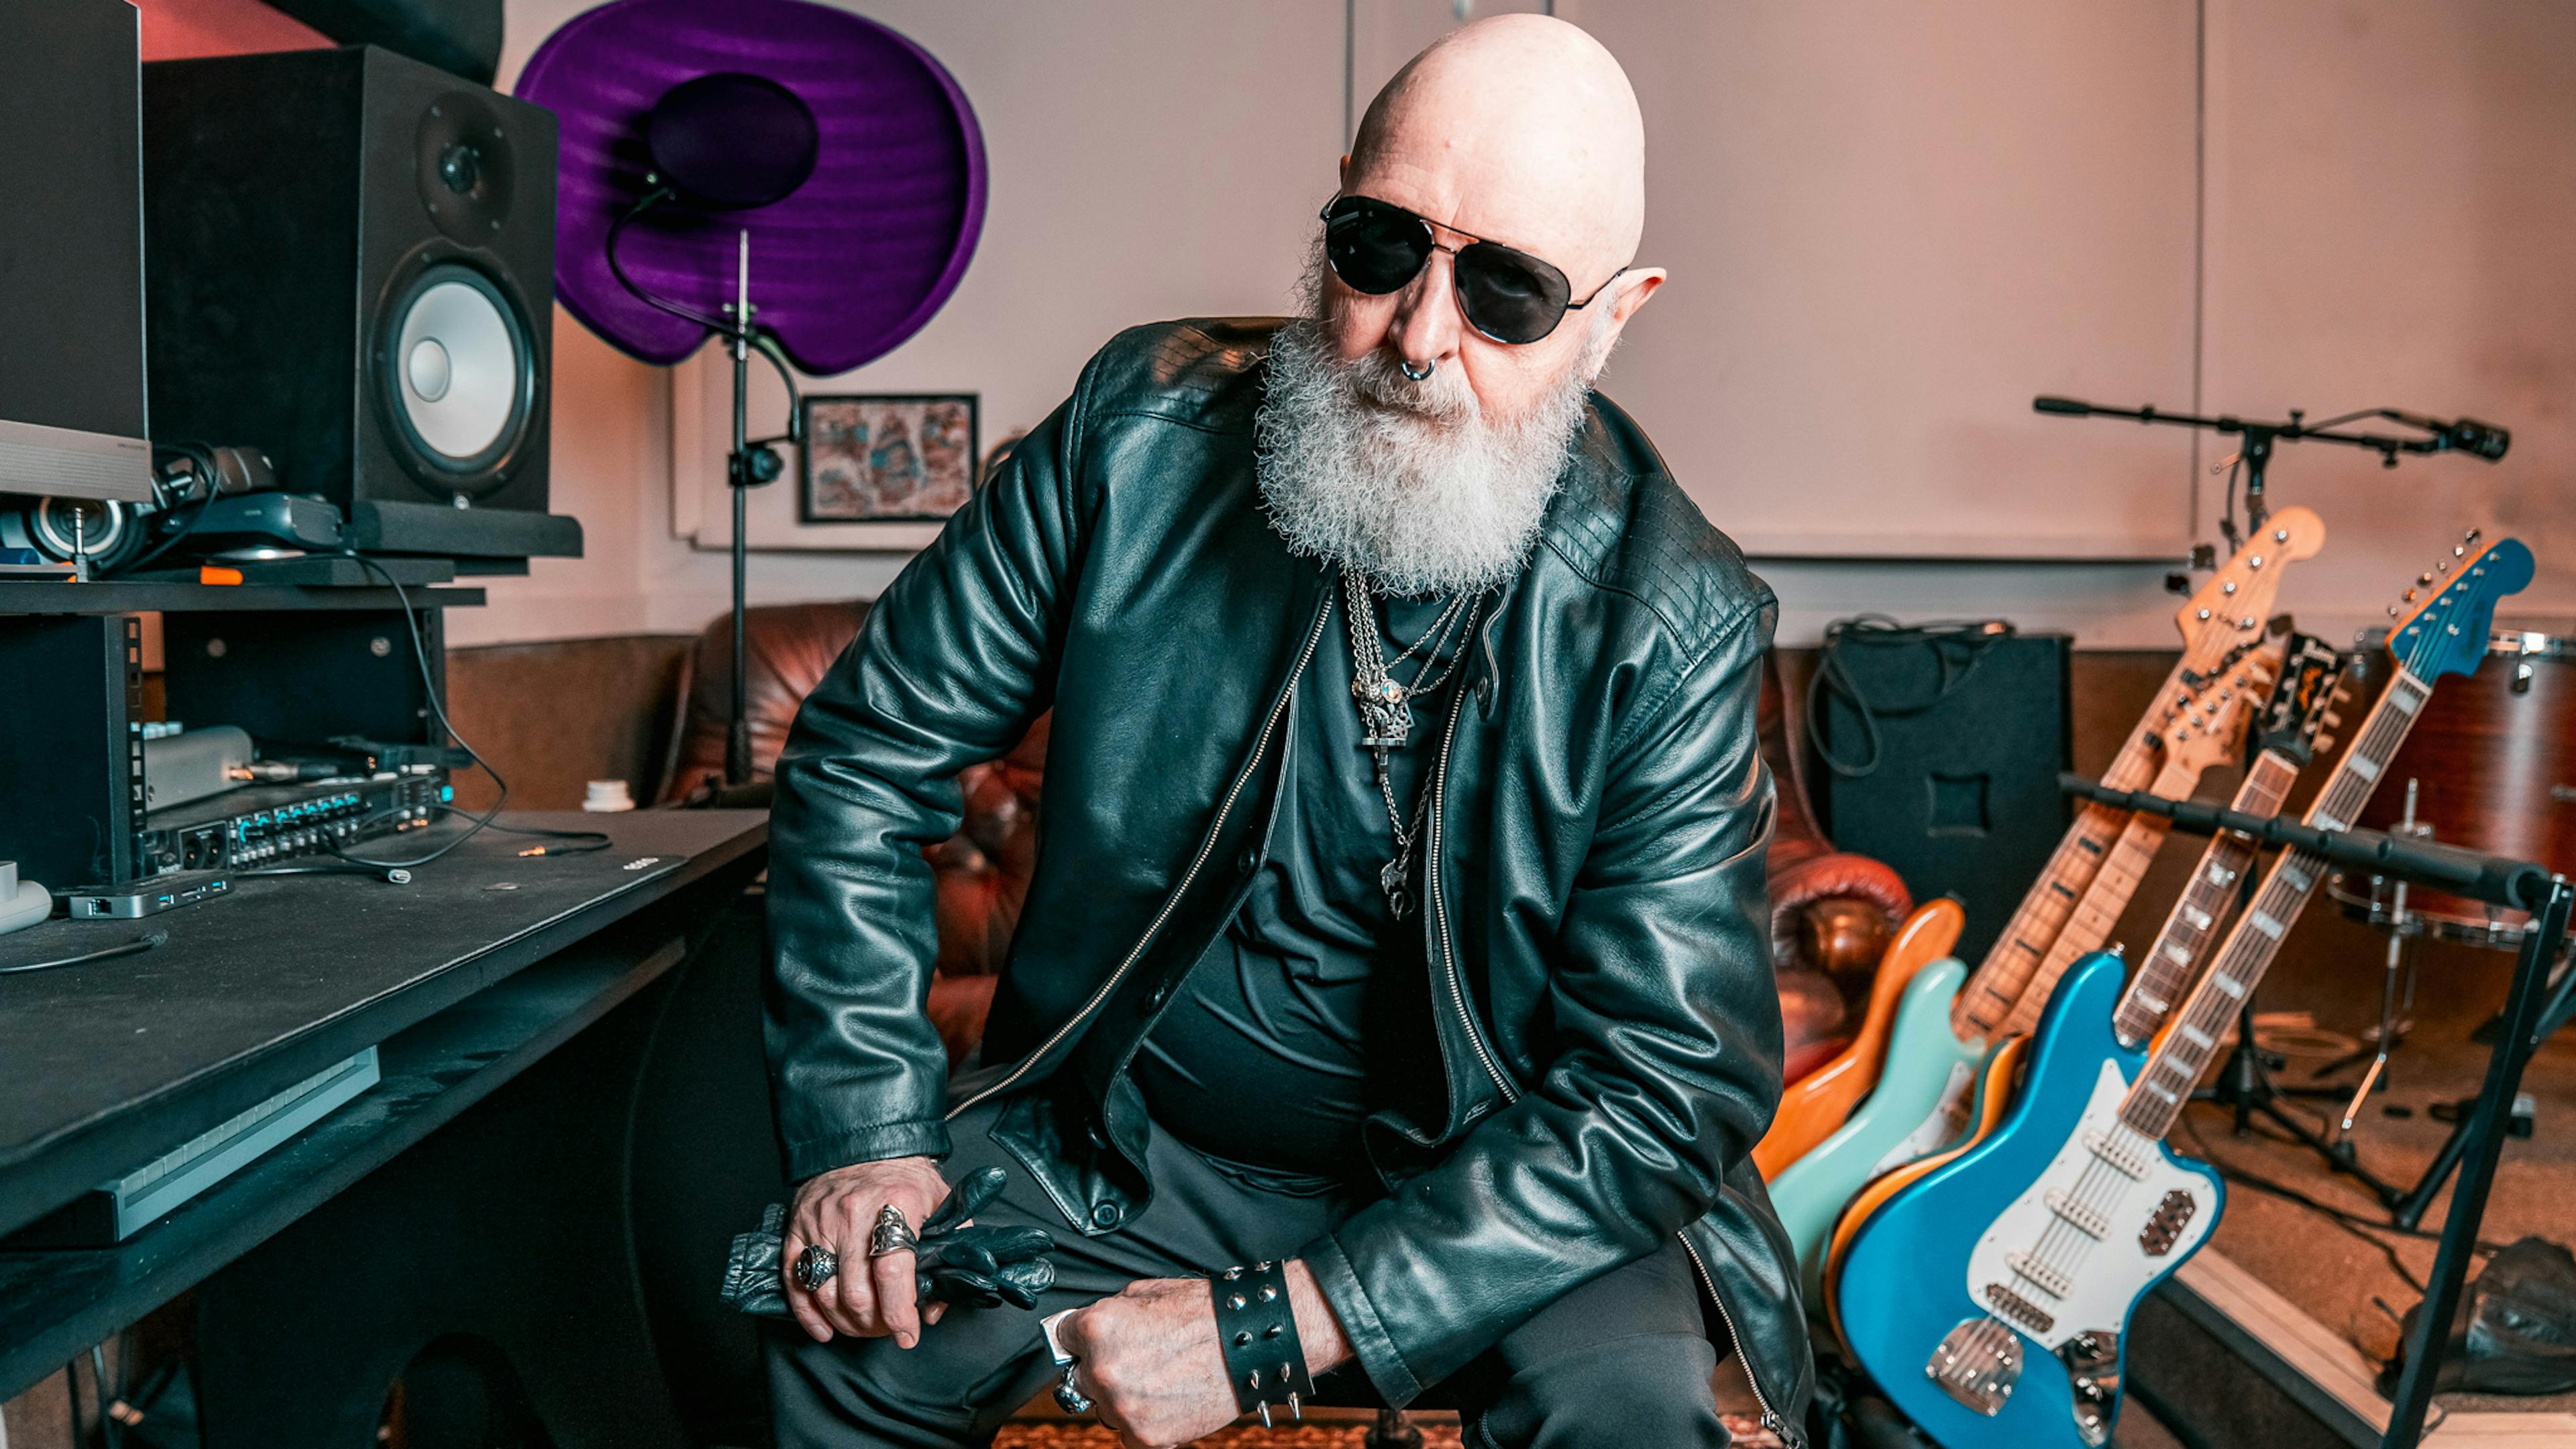 “When you’ve cheated death, it changes your outlook on life”: Rob Halford takes us inside Judas Priest’s powerful, emotionally real new album